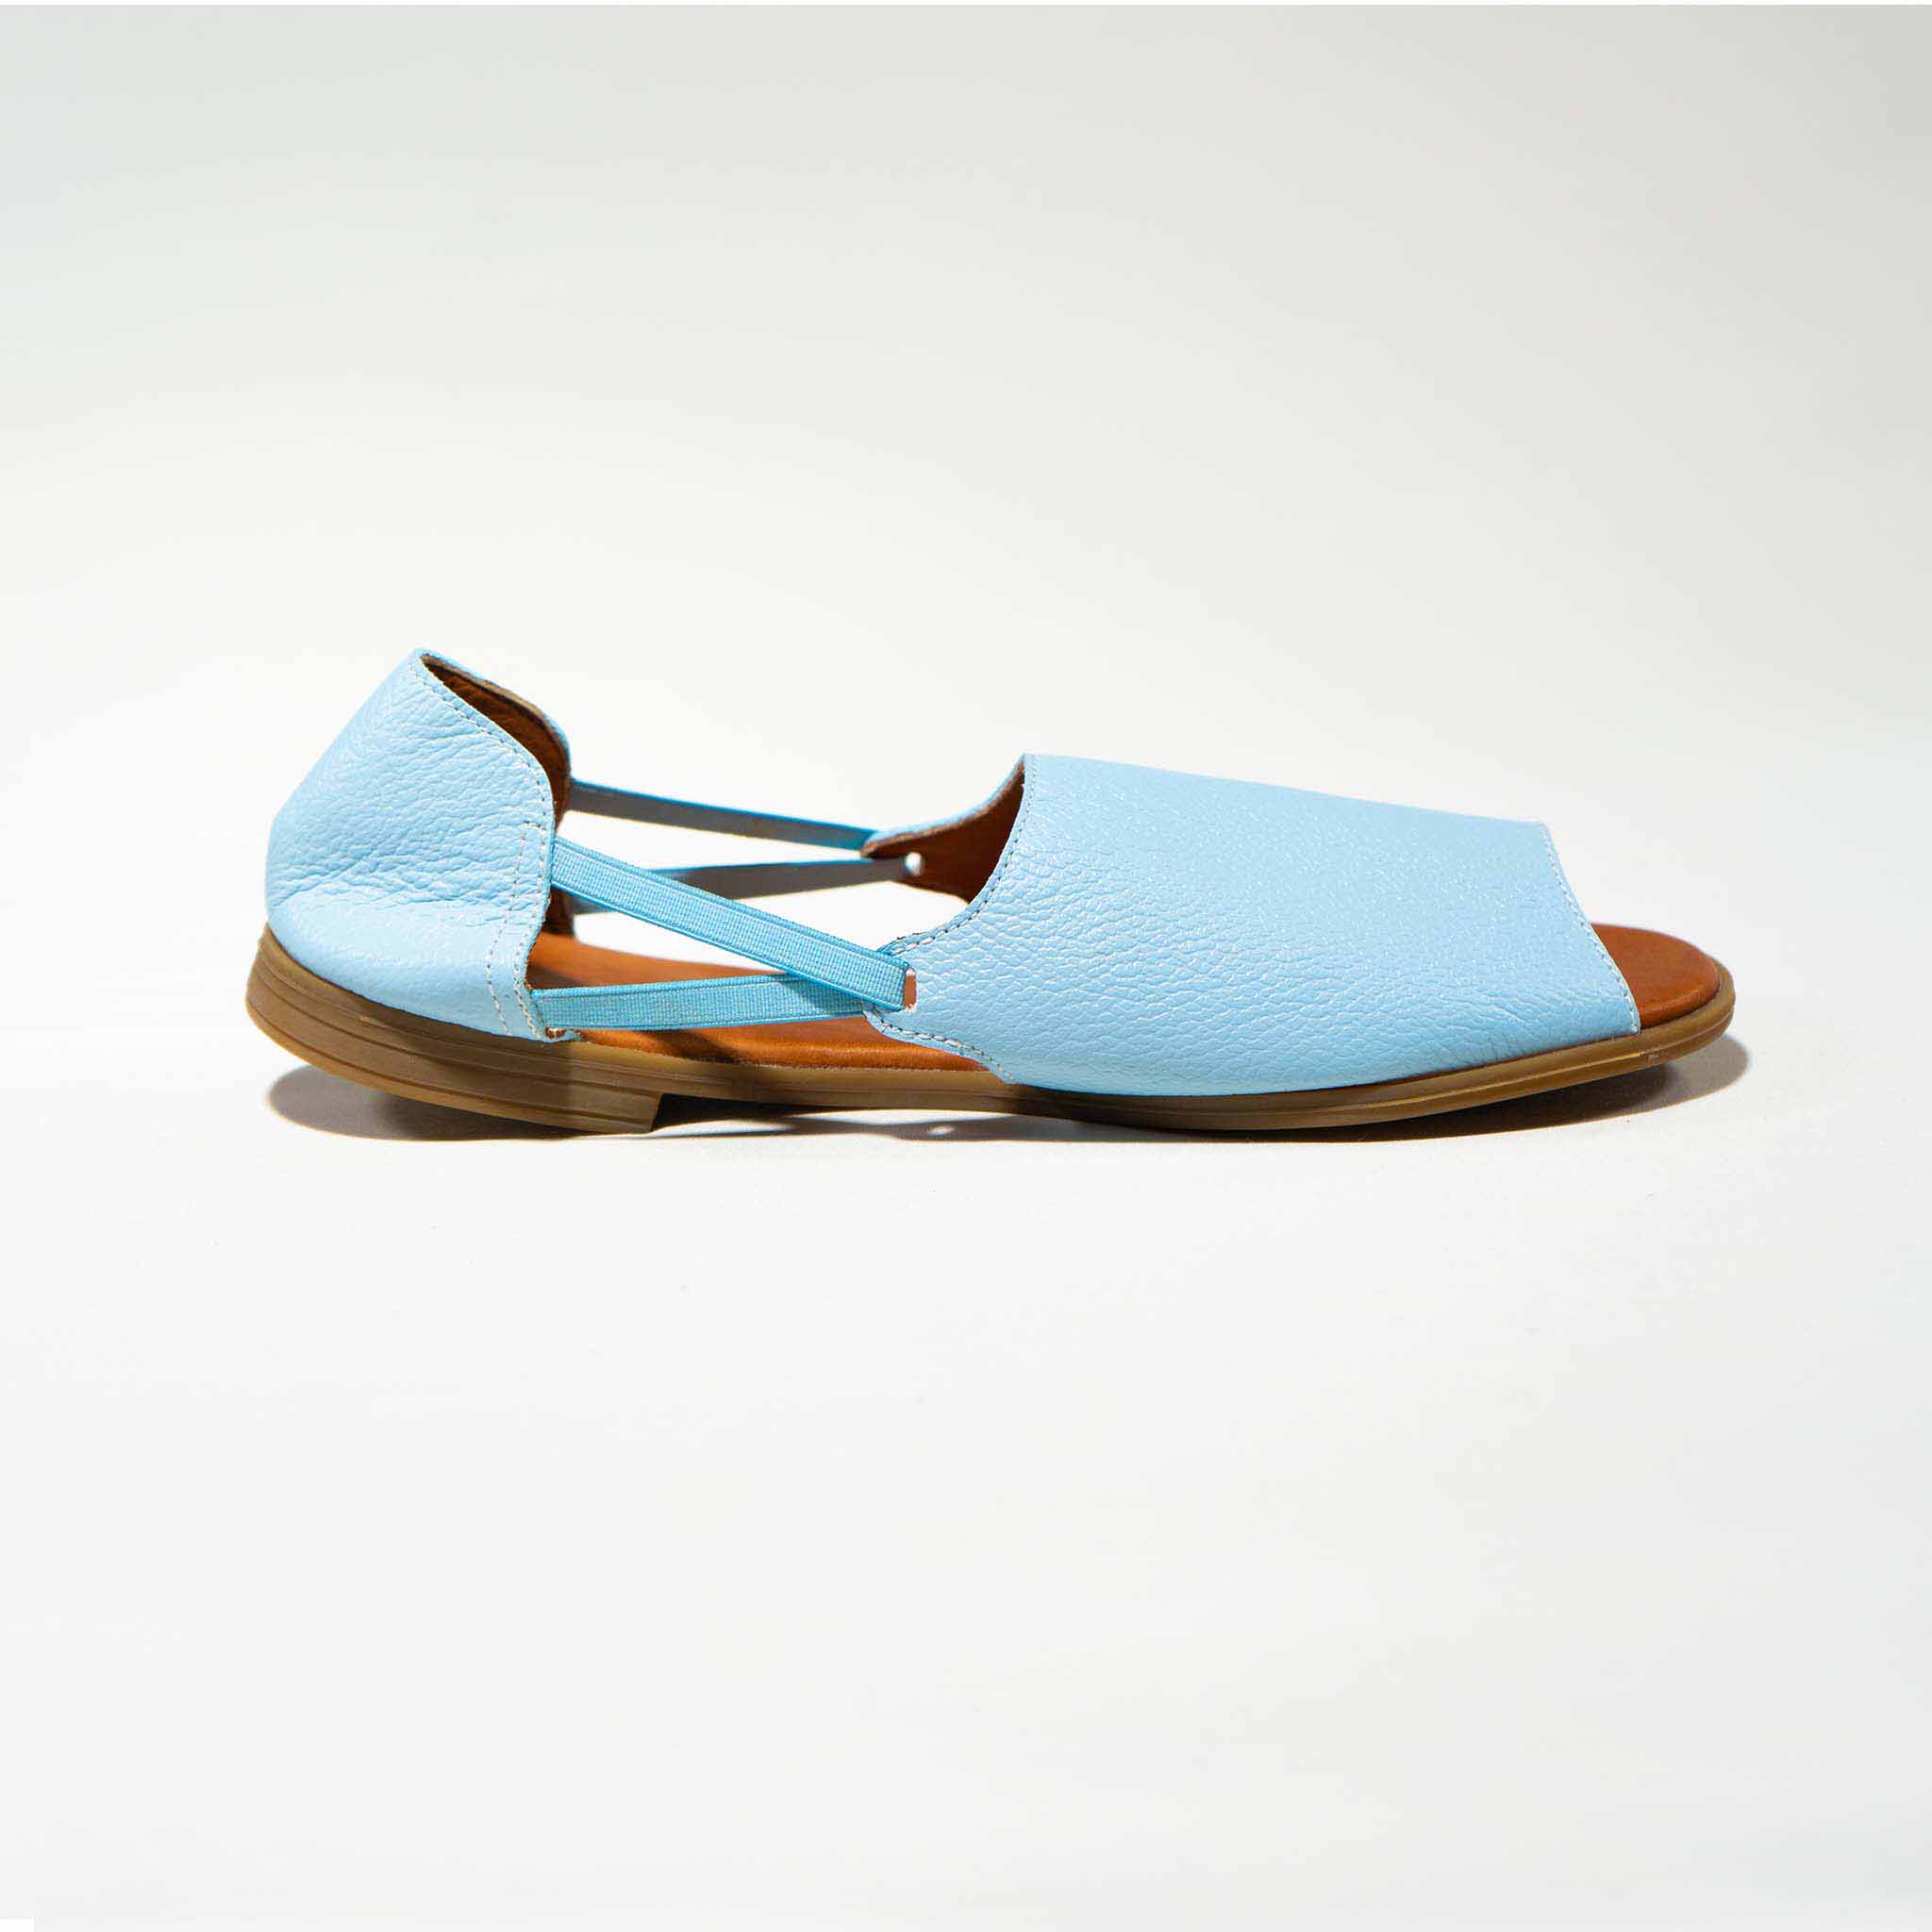 Womads blue sandals side view